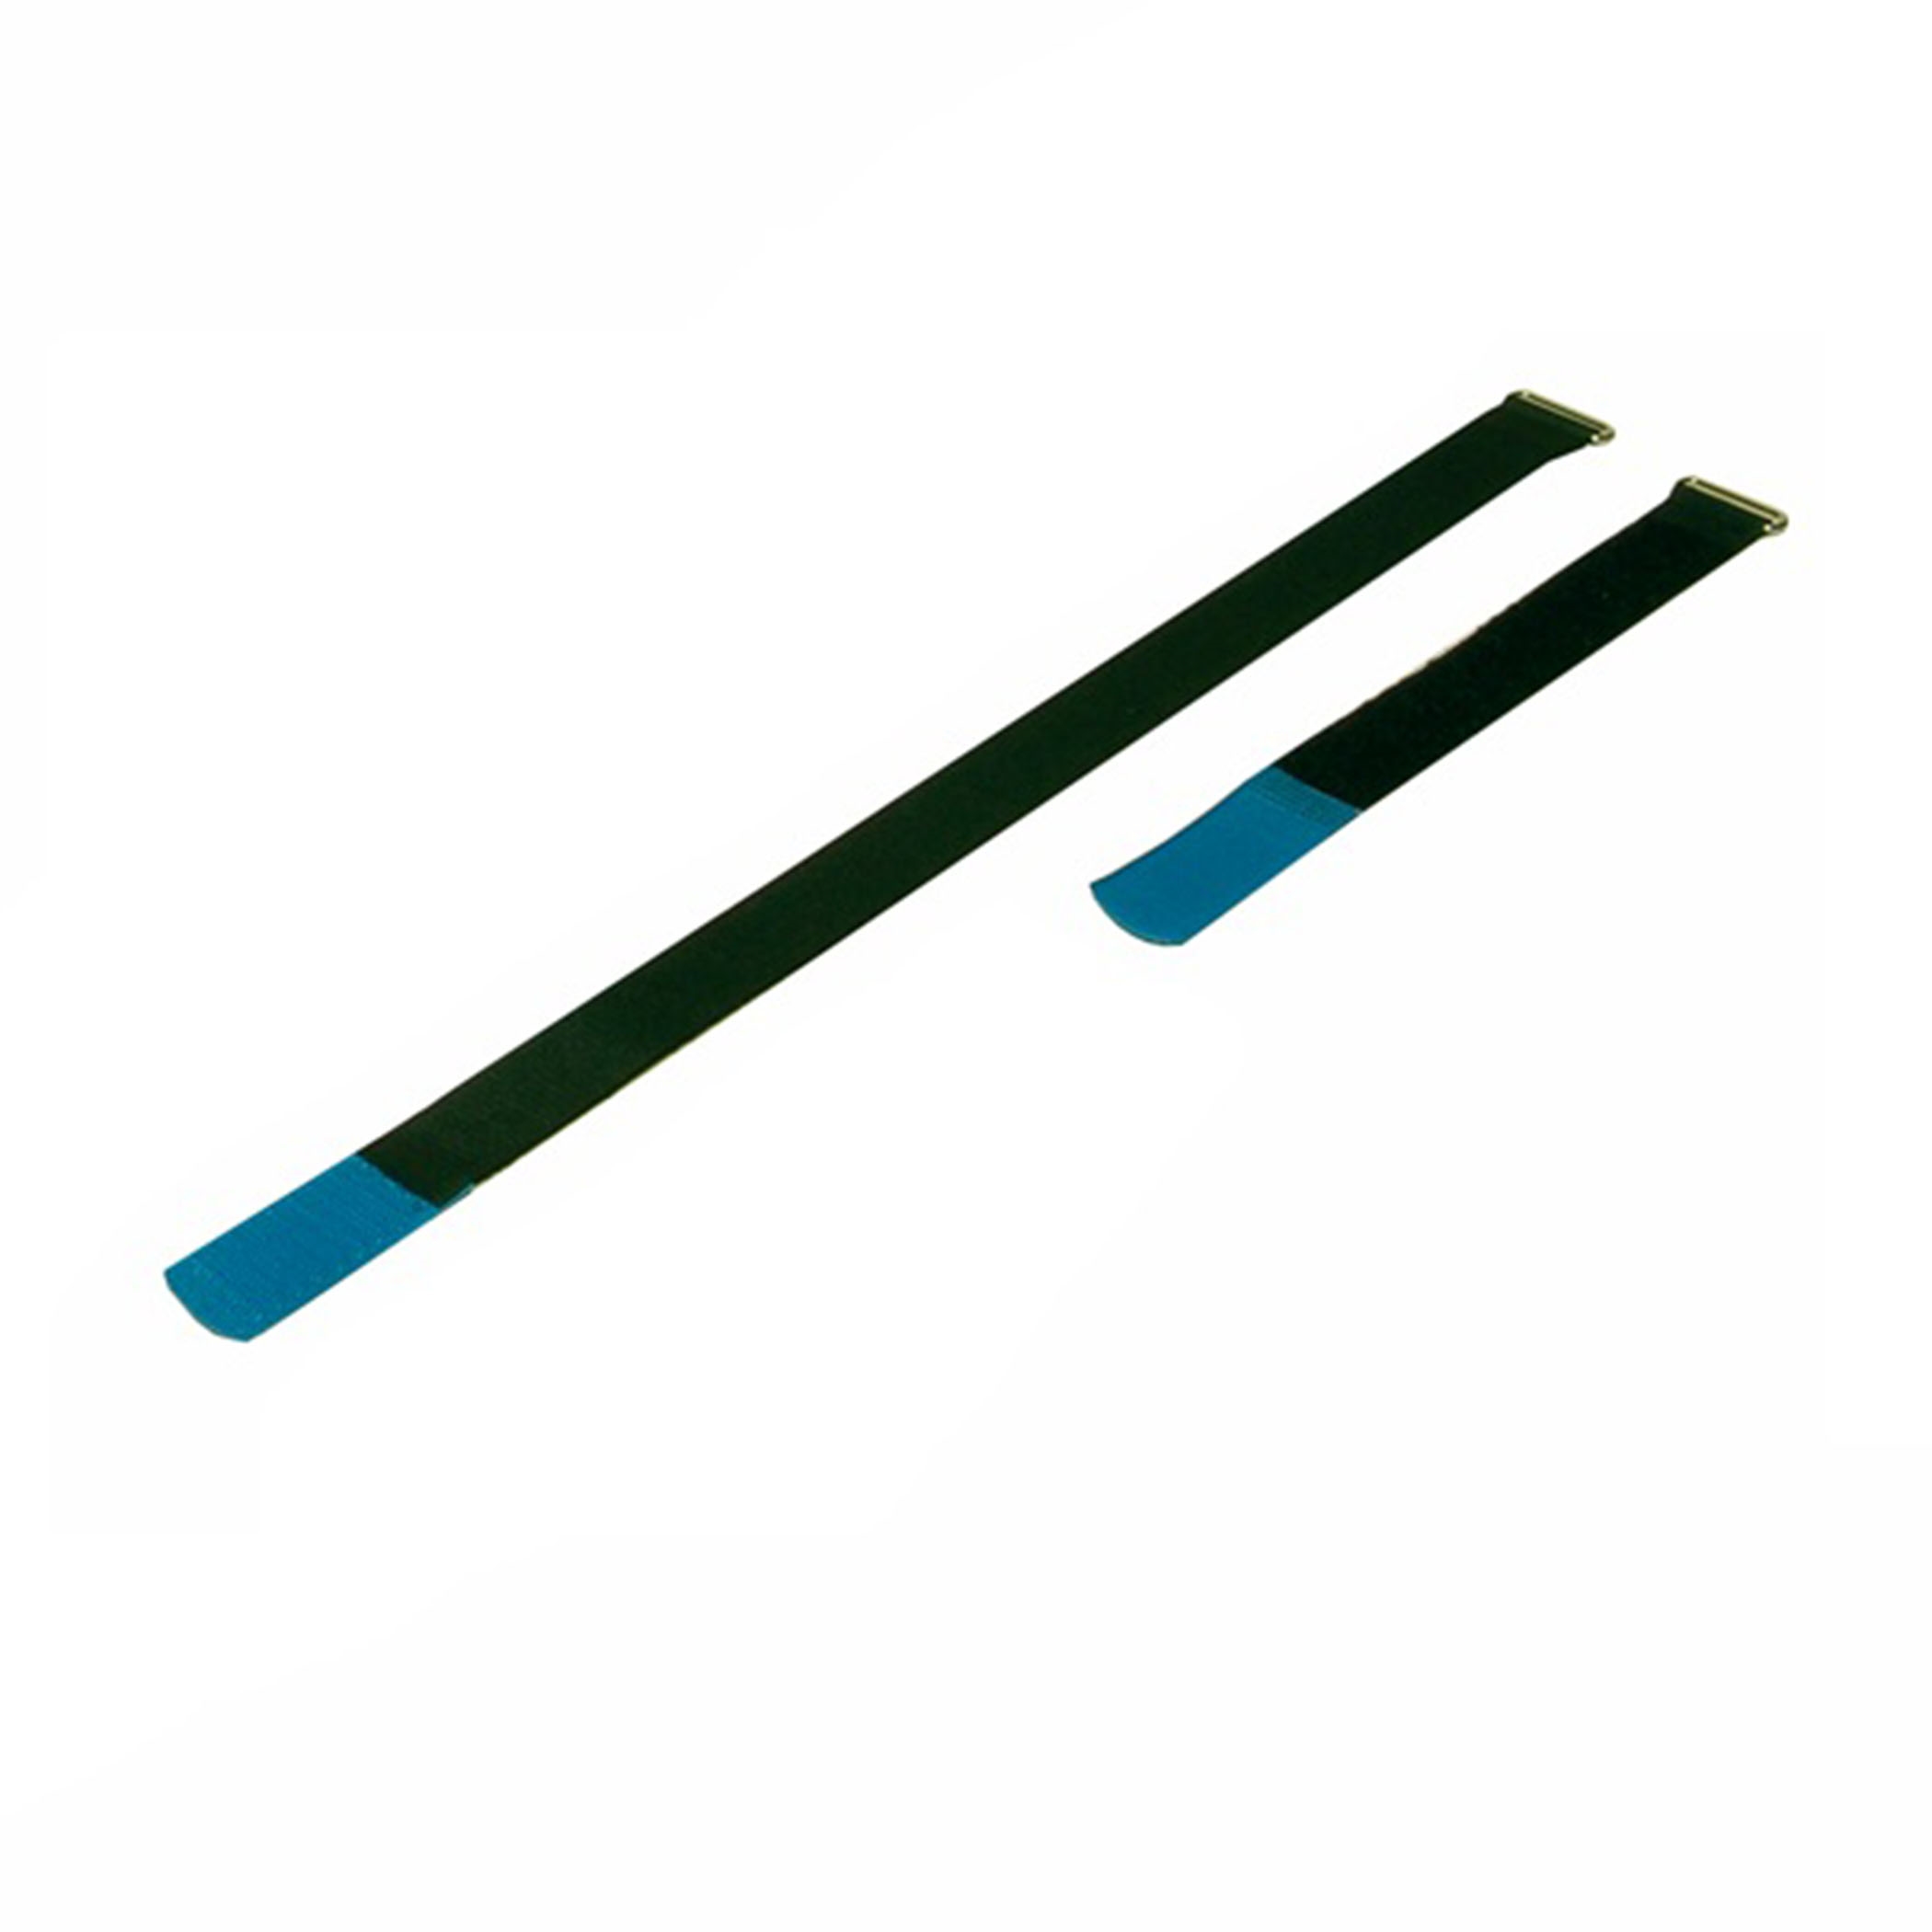 Cable Tie 300x25mm with Hook Blue, (10 pieces) - a2530h